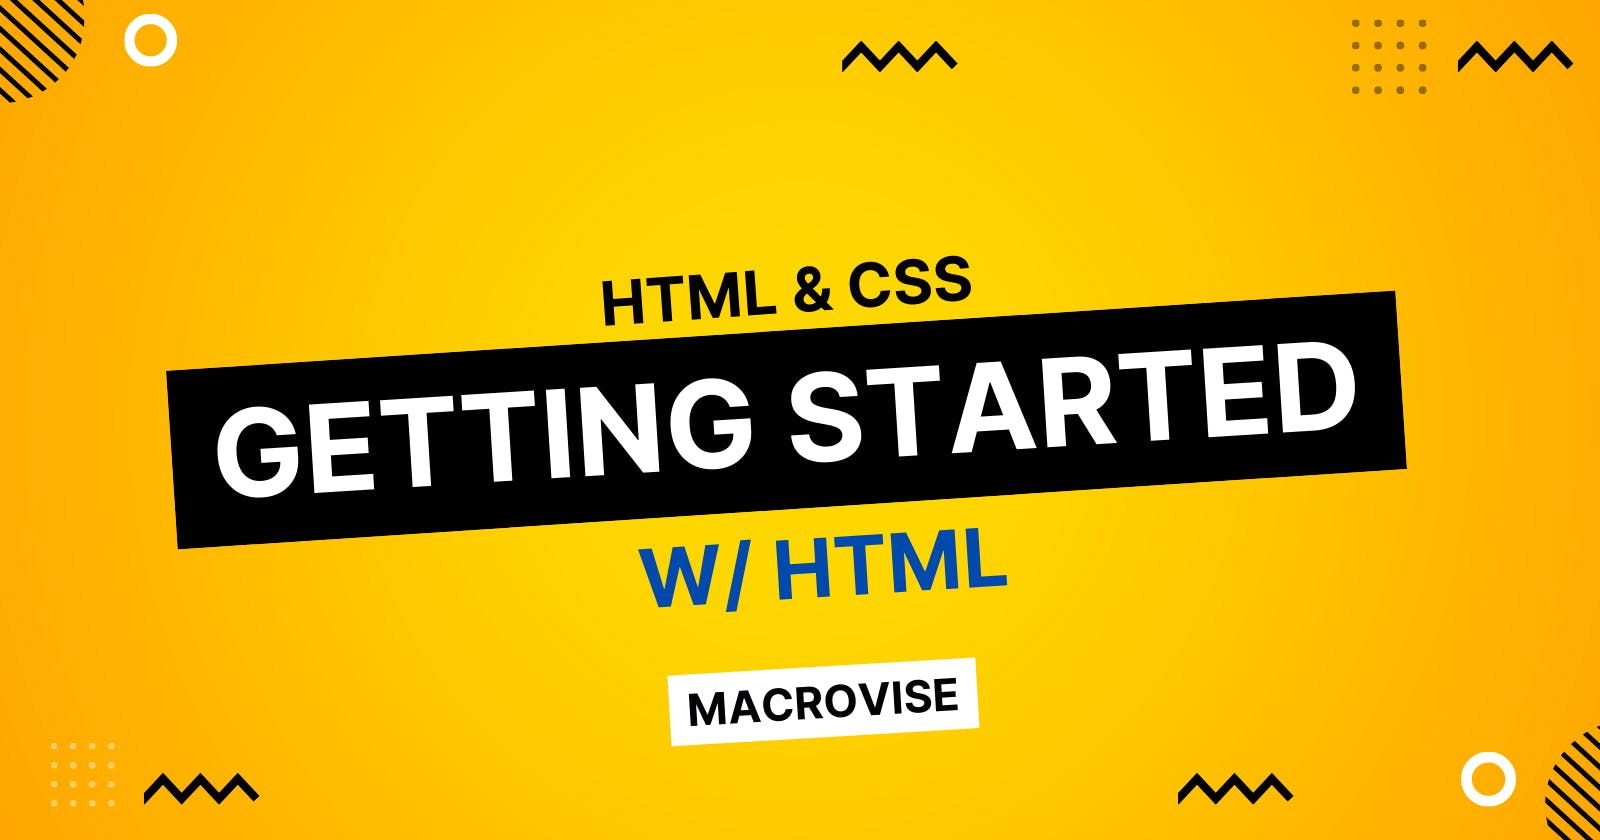 Getting Started with HTML